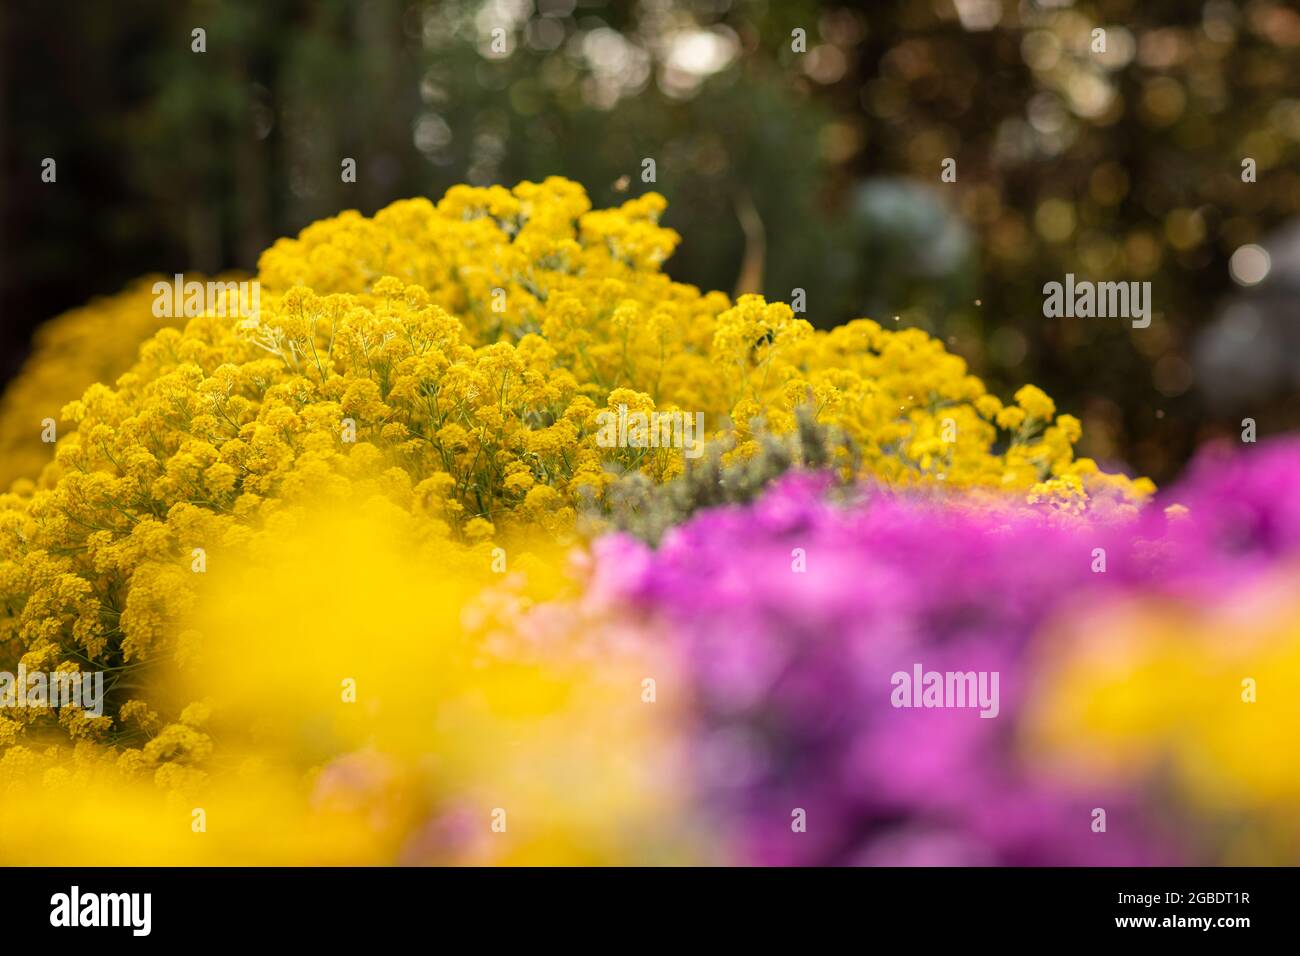 yellow golden aurinia saxatilis flowers and purple aubrieta cascade with lots of small petals beautifully blooming in a backyard garden surrounded by Stock Photo